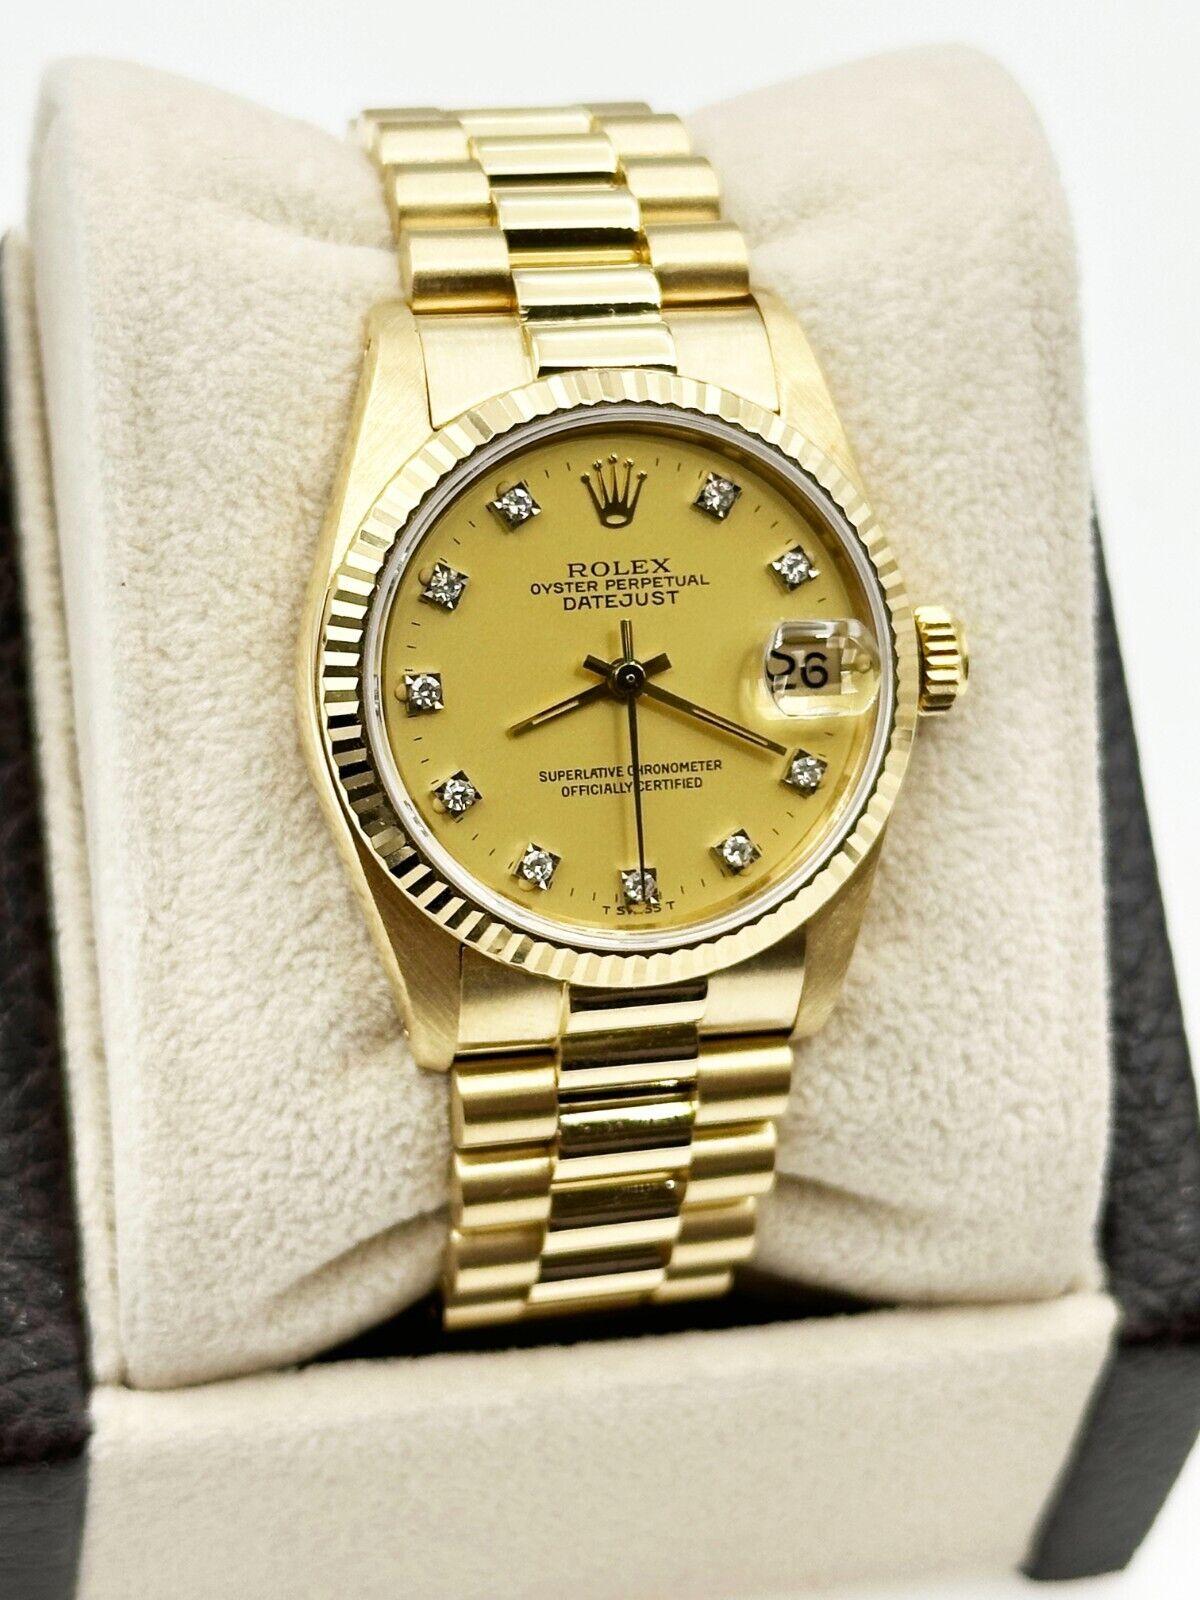 Style Number: 6827

Serial: 8093***

Year: 1984

Model: Midsize President

Case Material: 18K Yellow Gold 

Band: 18K Yellow Gold 

Bezel: 18K Yellow Gold 

Dial: Factory Champagne Diamond Dial

Face: Sapphire Crystal

Case Size: 31mm
 
Includes: